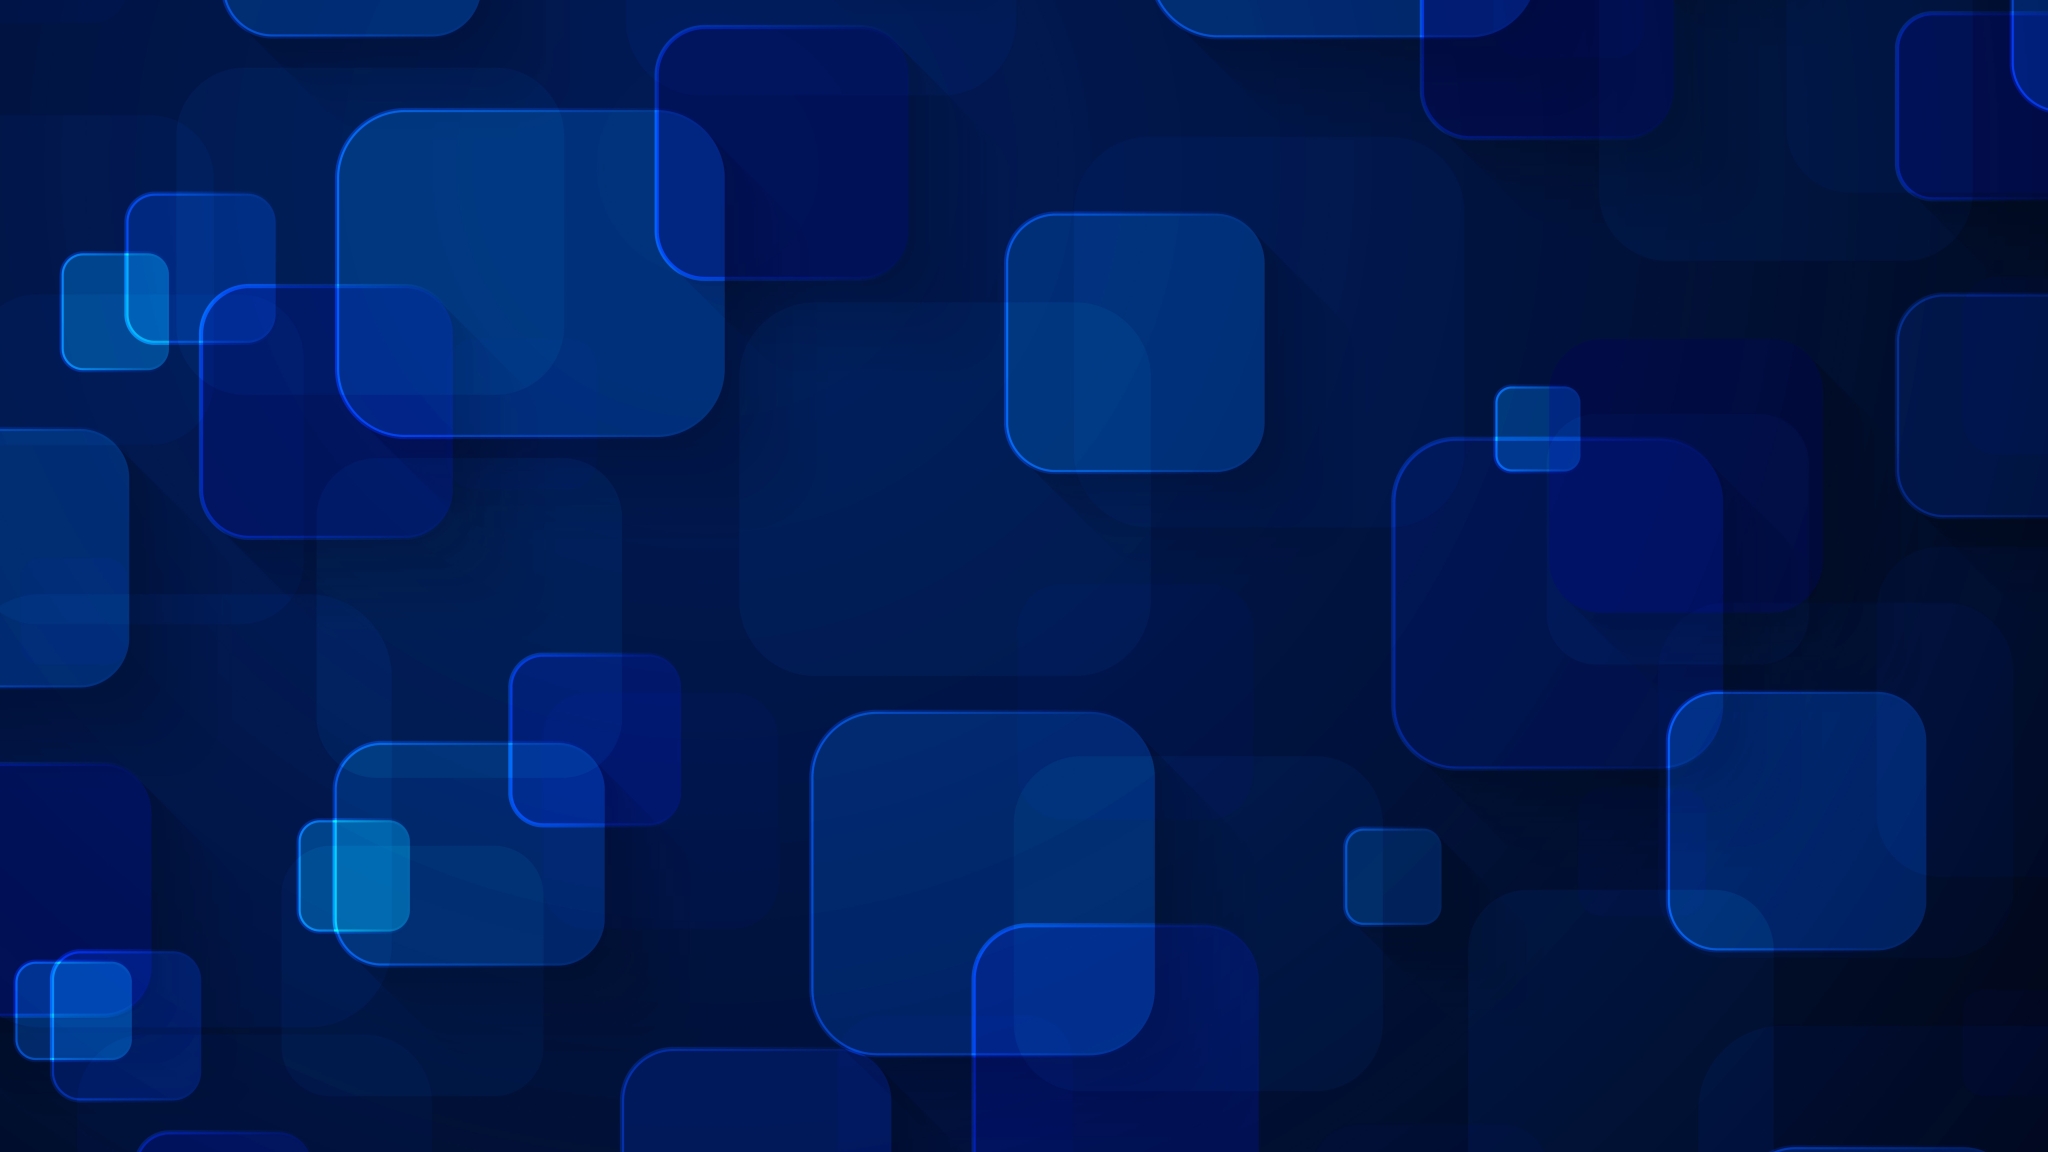 48x1152 Blue Digital Art Squares 48x1152 Resolution Wallpaper Hd Abstract 4k Wallpapers Images Photos And Background